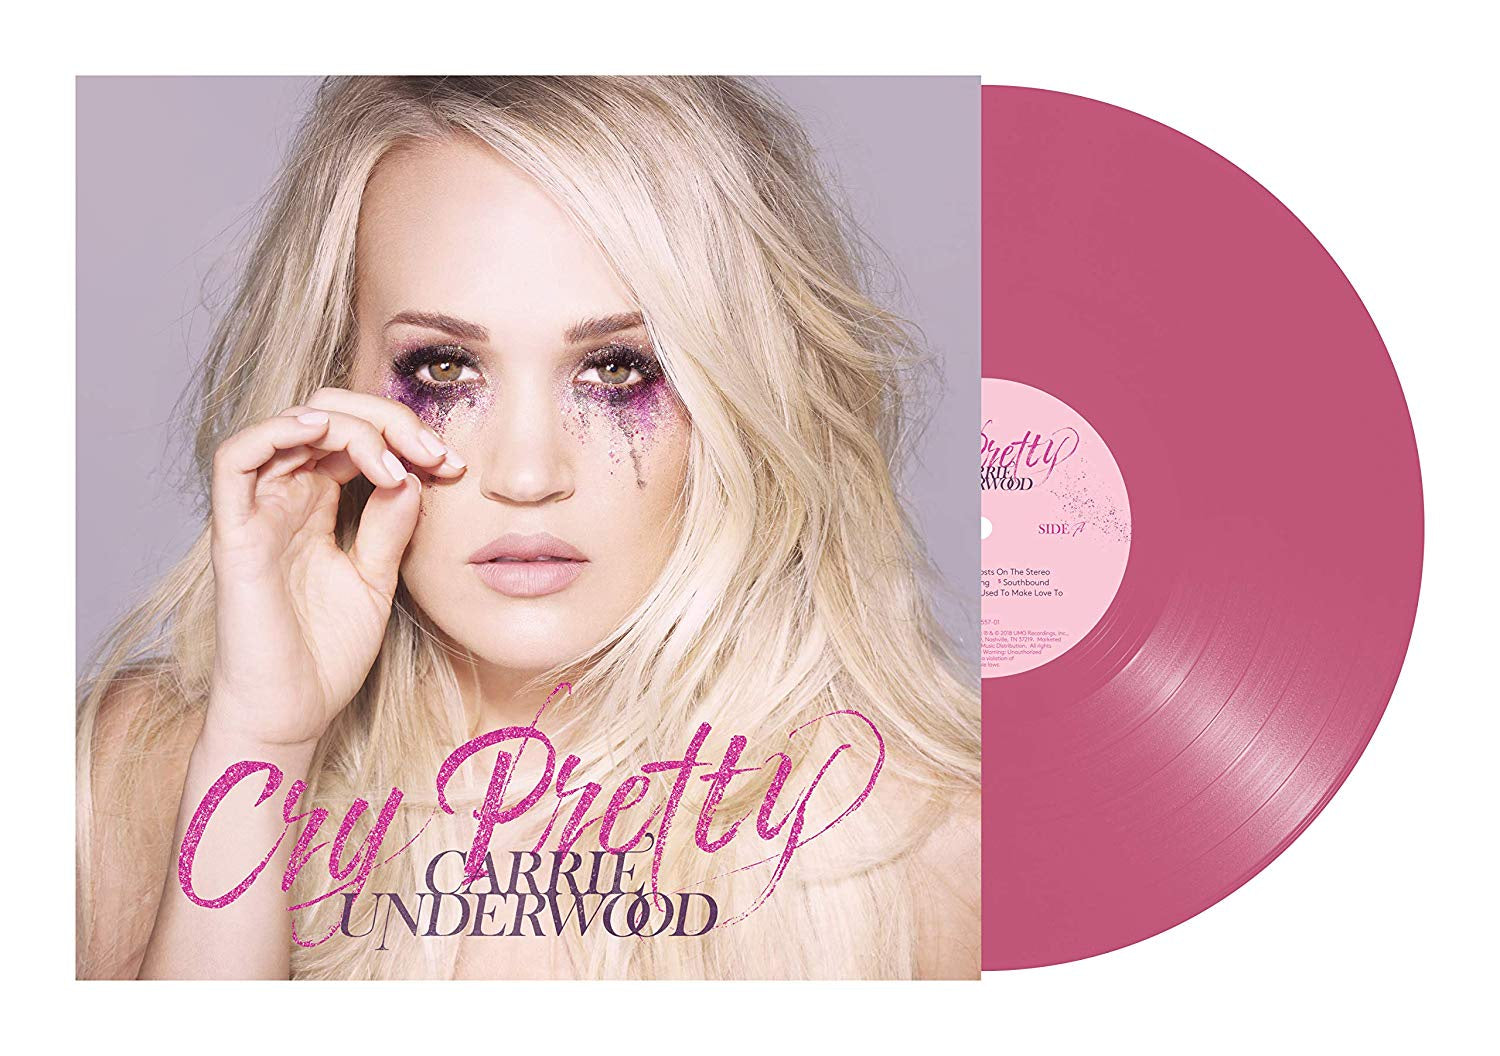 Carrie Underwood - Cry Pretty - New Vinyl Lp 2018 Capitol Limited Edition Pink Vinyl with Gatefold Jacket - Country / Game On